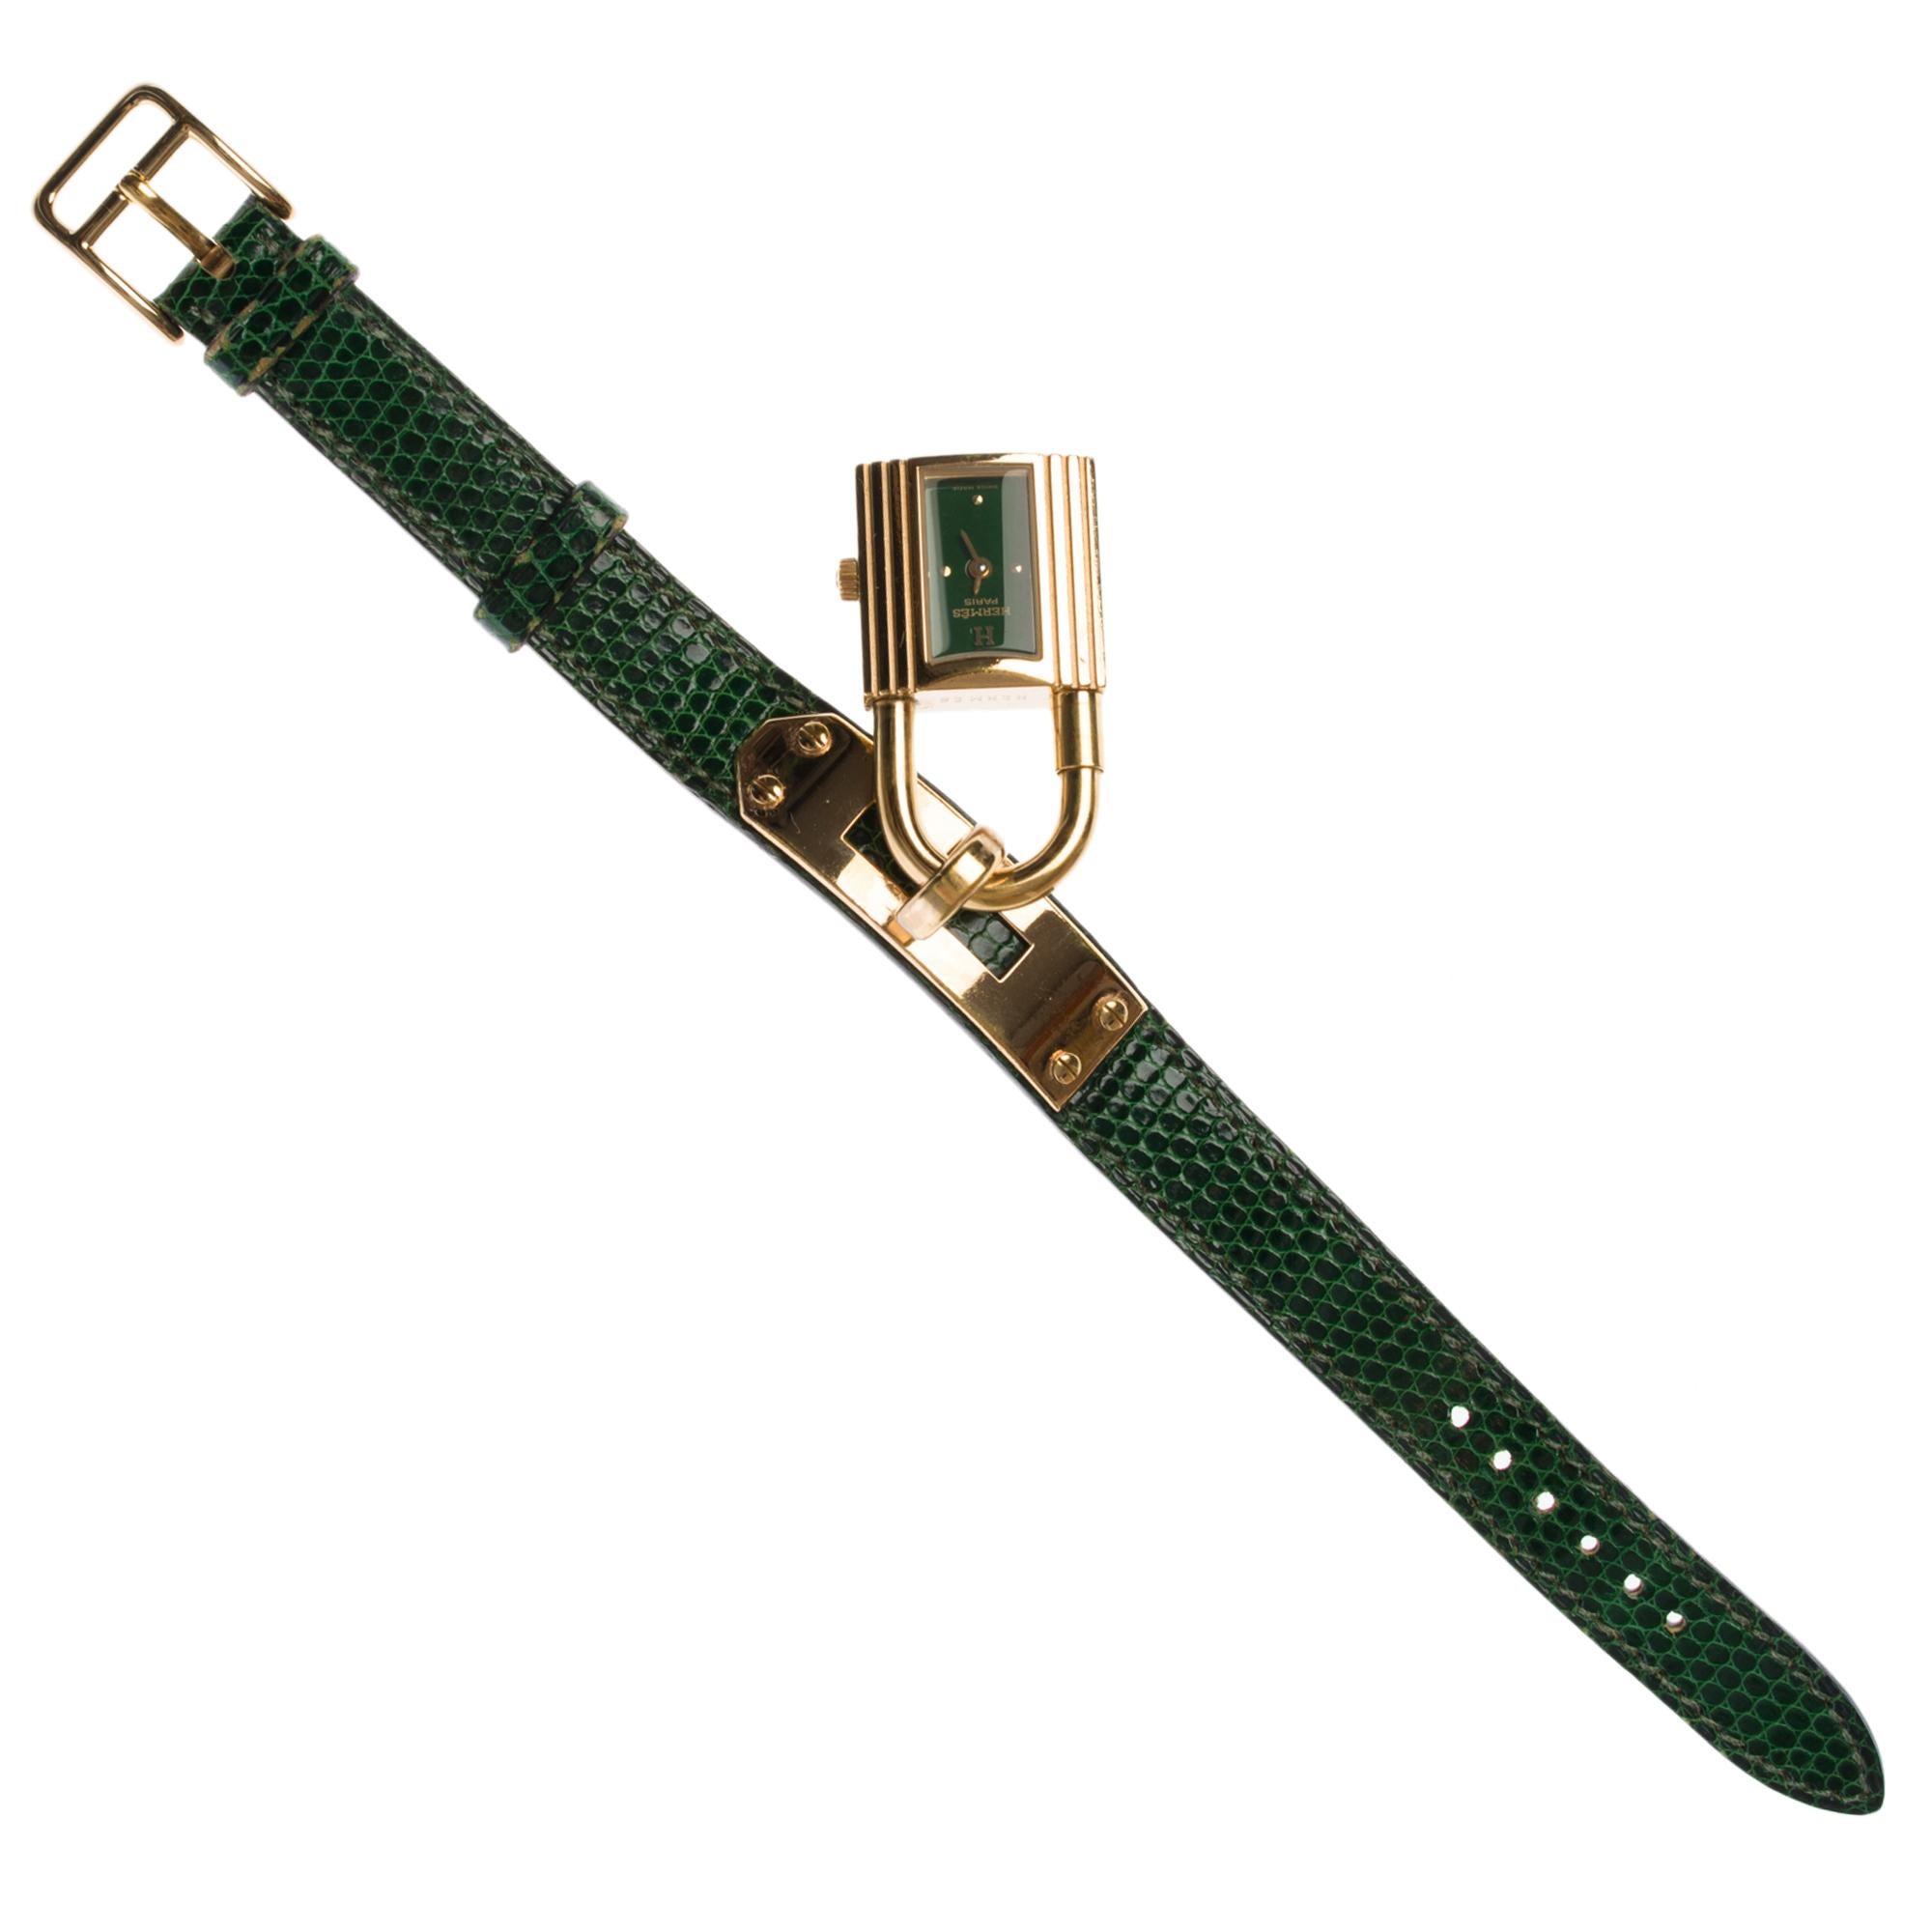 Hermes Kelly Gold Plated Padlock Bracelet Watch
Square case in gold plated with triple godrons, screwed bottom, fluted crown

Green dial, quartz movement
Applied indexes, straight gold-plated needles
Hermès Green Leather Bracelet, Hermès Gold Plated